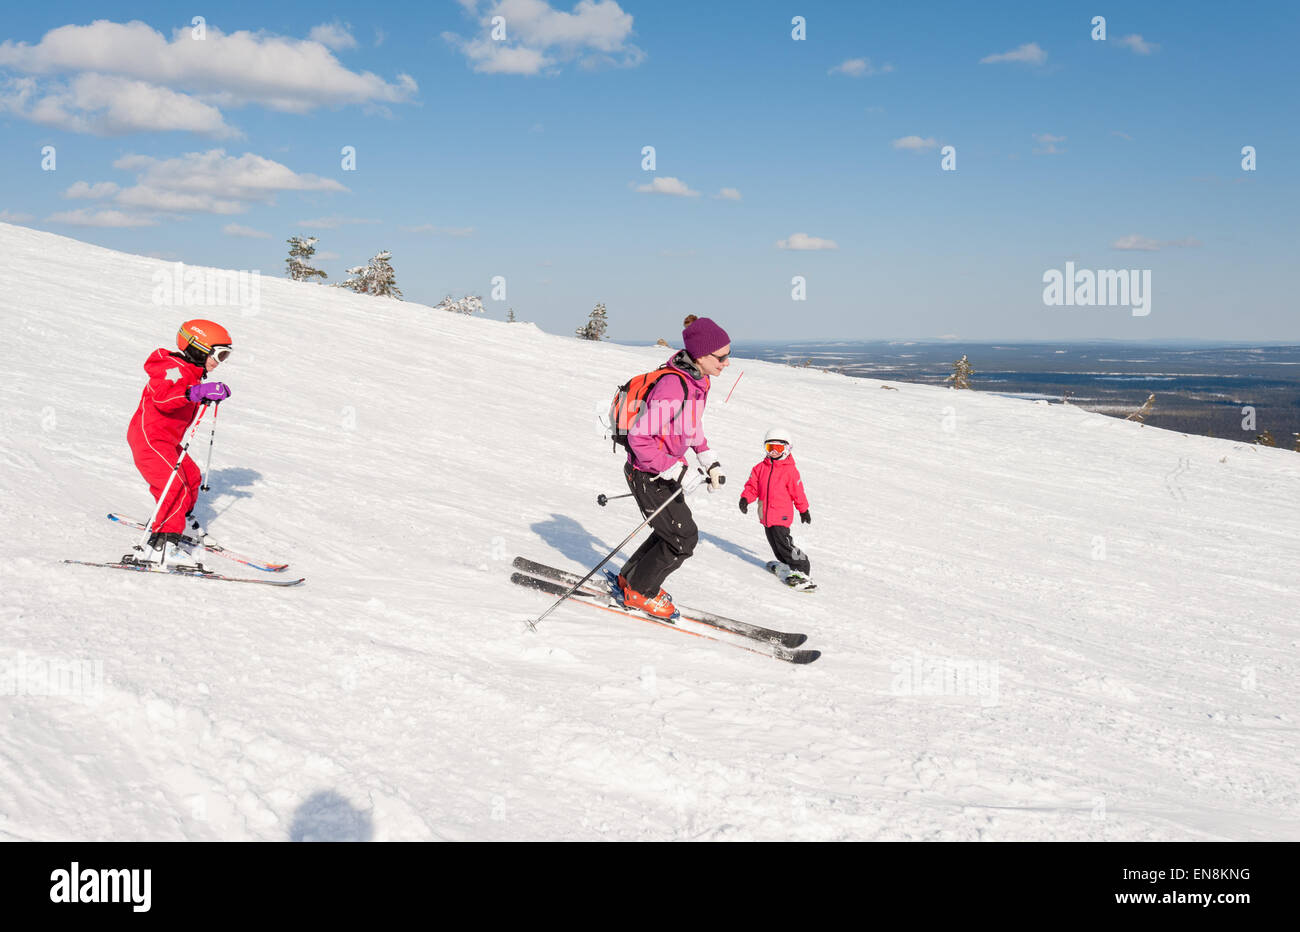 Spring skiing at Ylläs ski resort, Lapland, Finland. For MR please enquire. Stock Photo